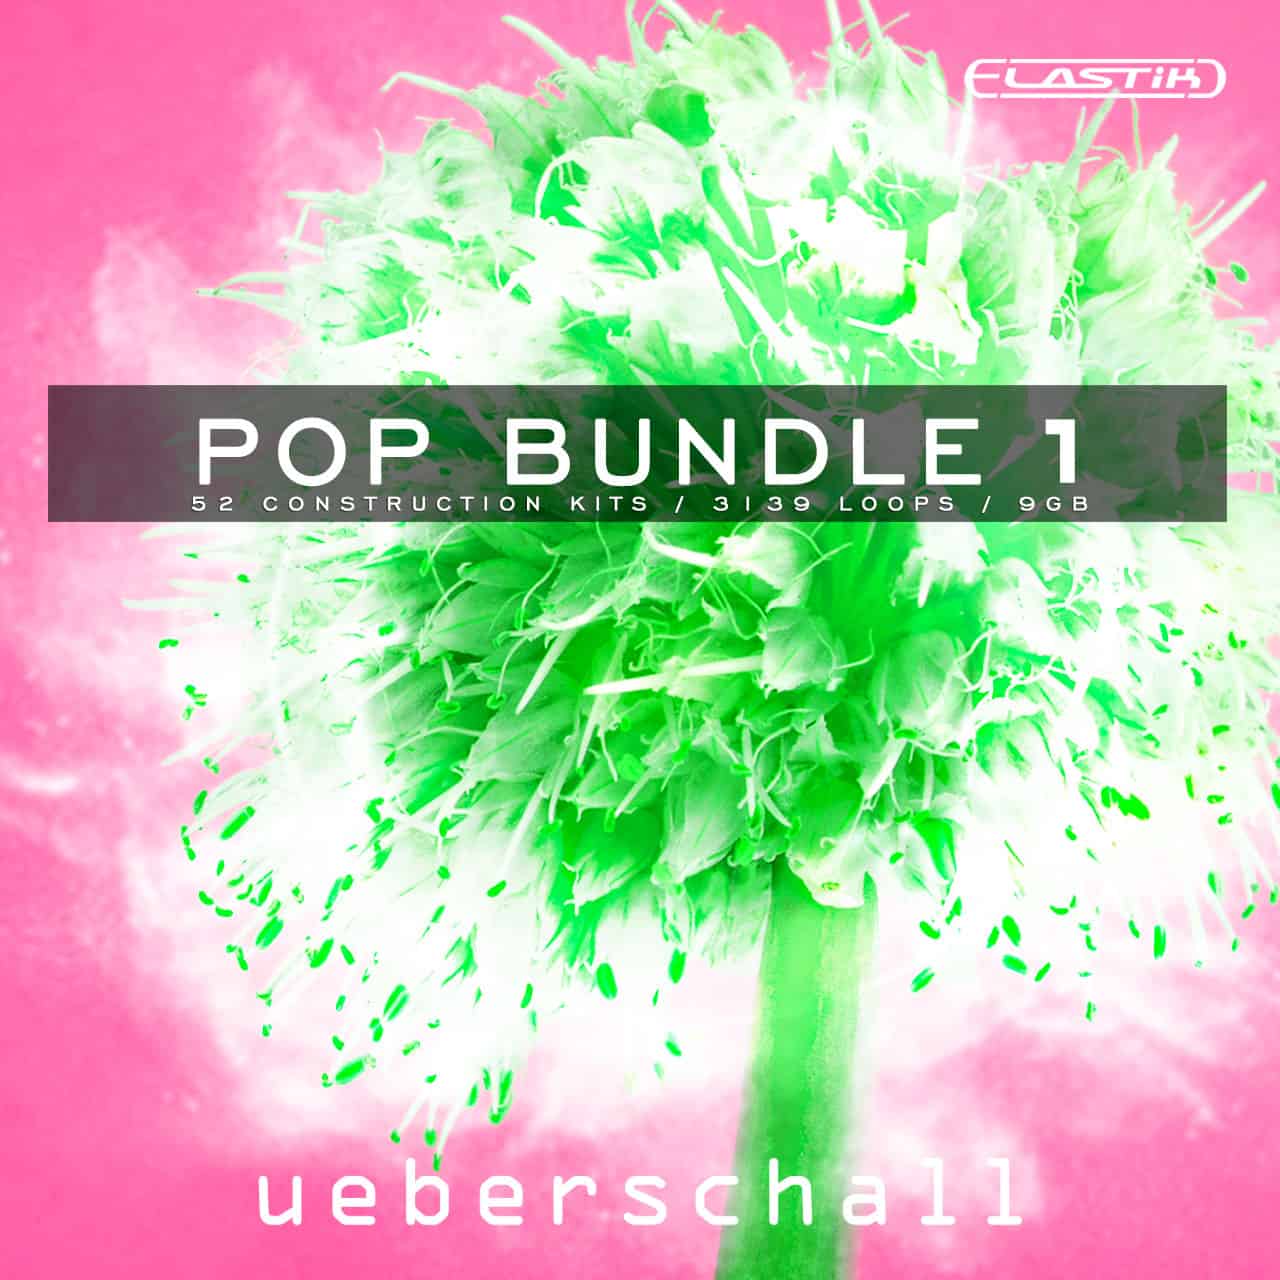 Pop Bundle 1 by Ueberschall – The Sample Meisters from Germany